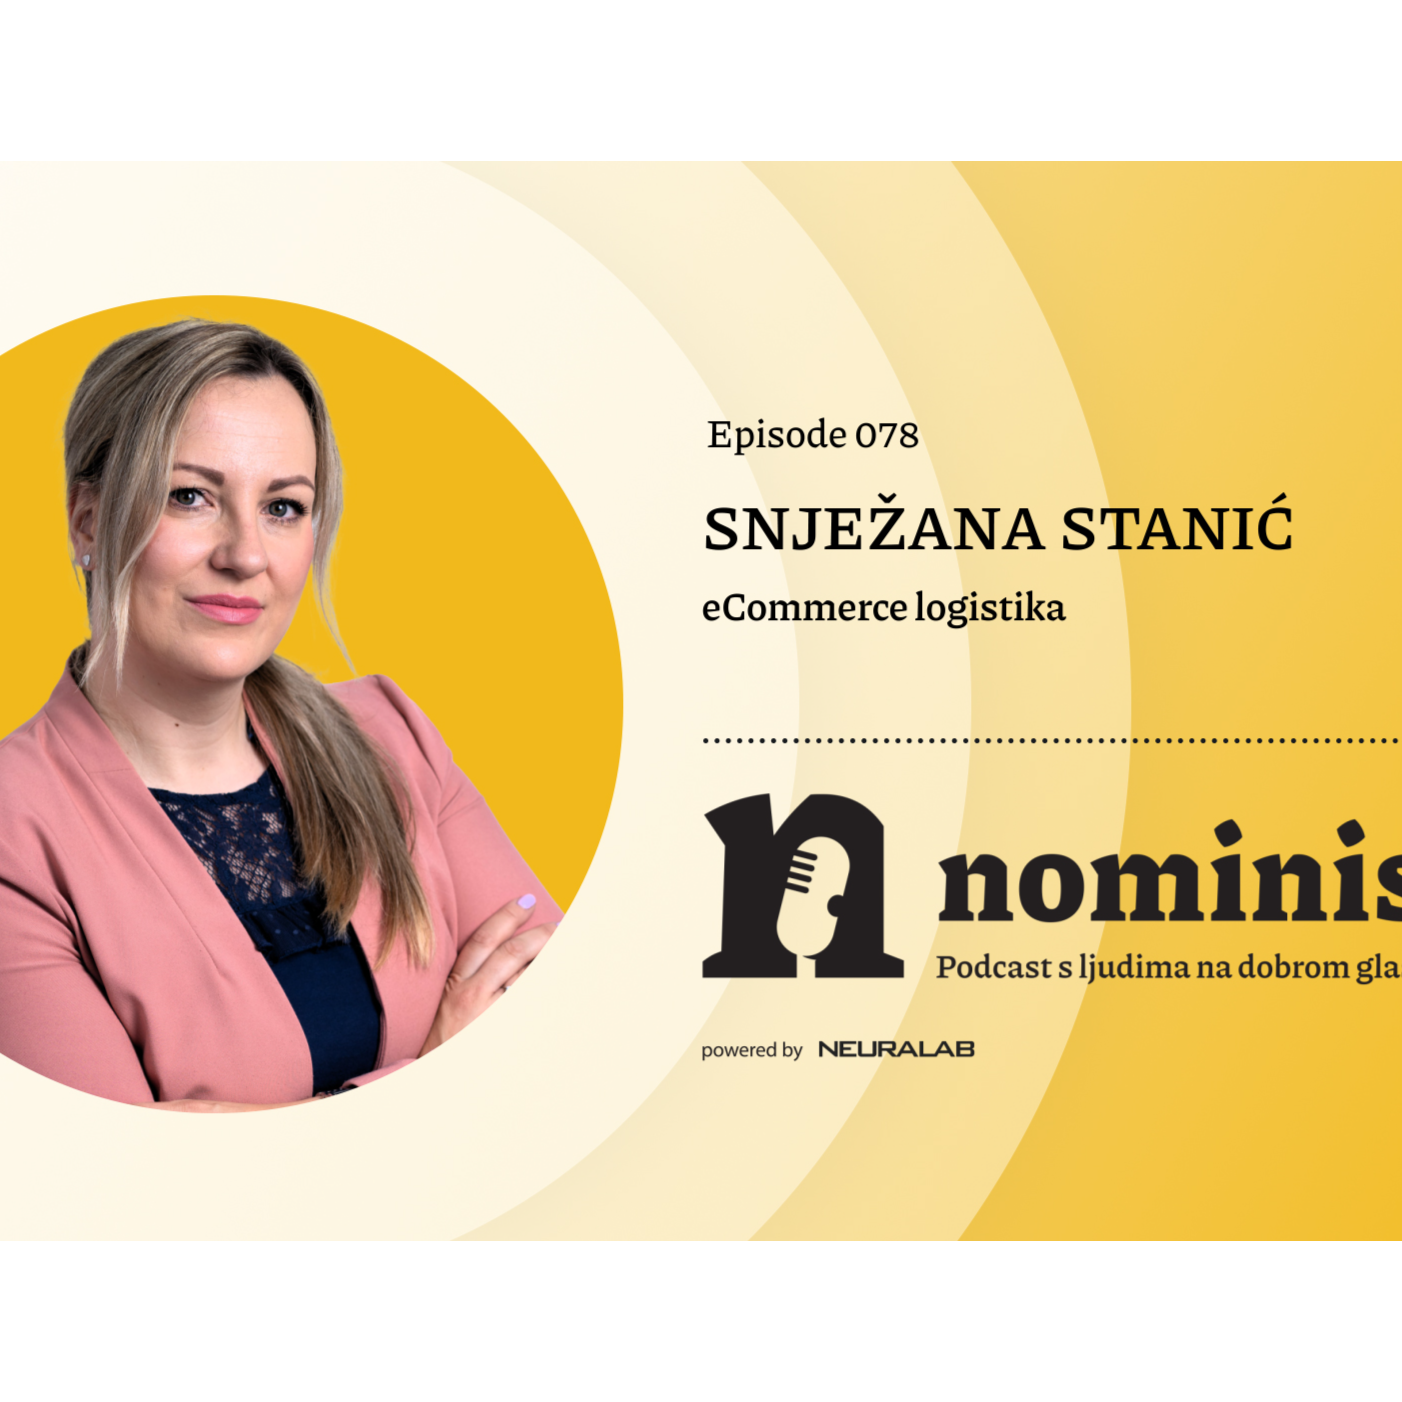 Nominis e78 - eCommerce logistika (powered by Neuralab)